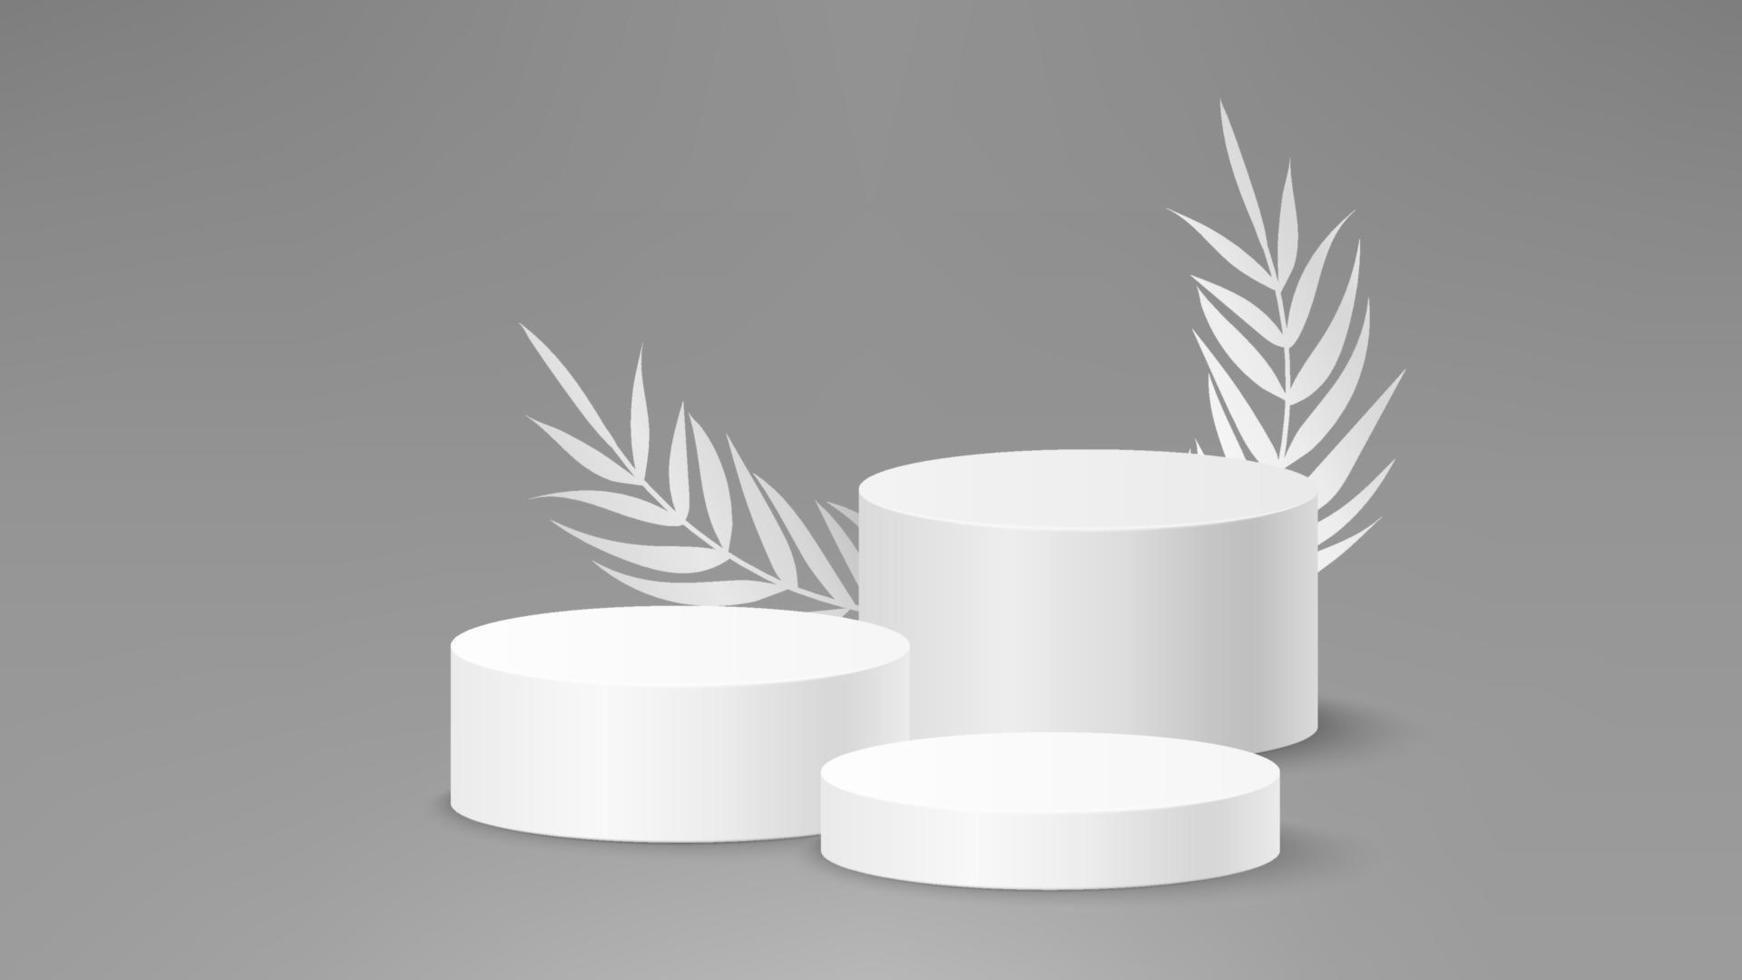 Gray light 3d background product display podium scene with leaf geometric platform. Stand to show cosmetic product. Realistic paper stage showcase on pedestal display monochrome backdrop. vector